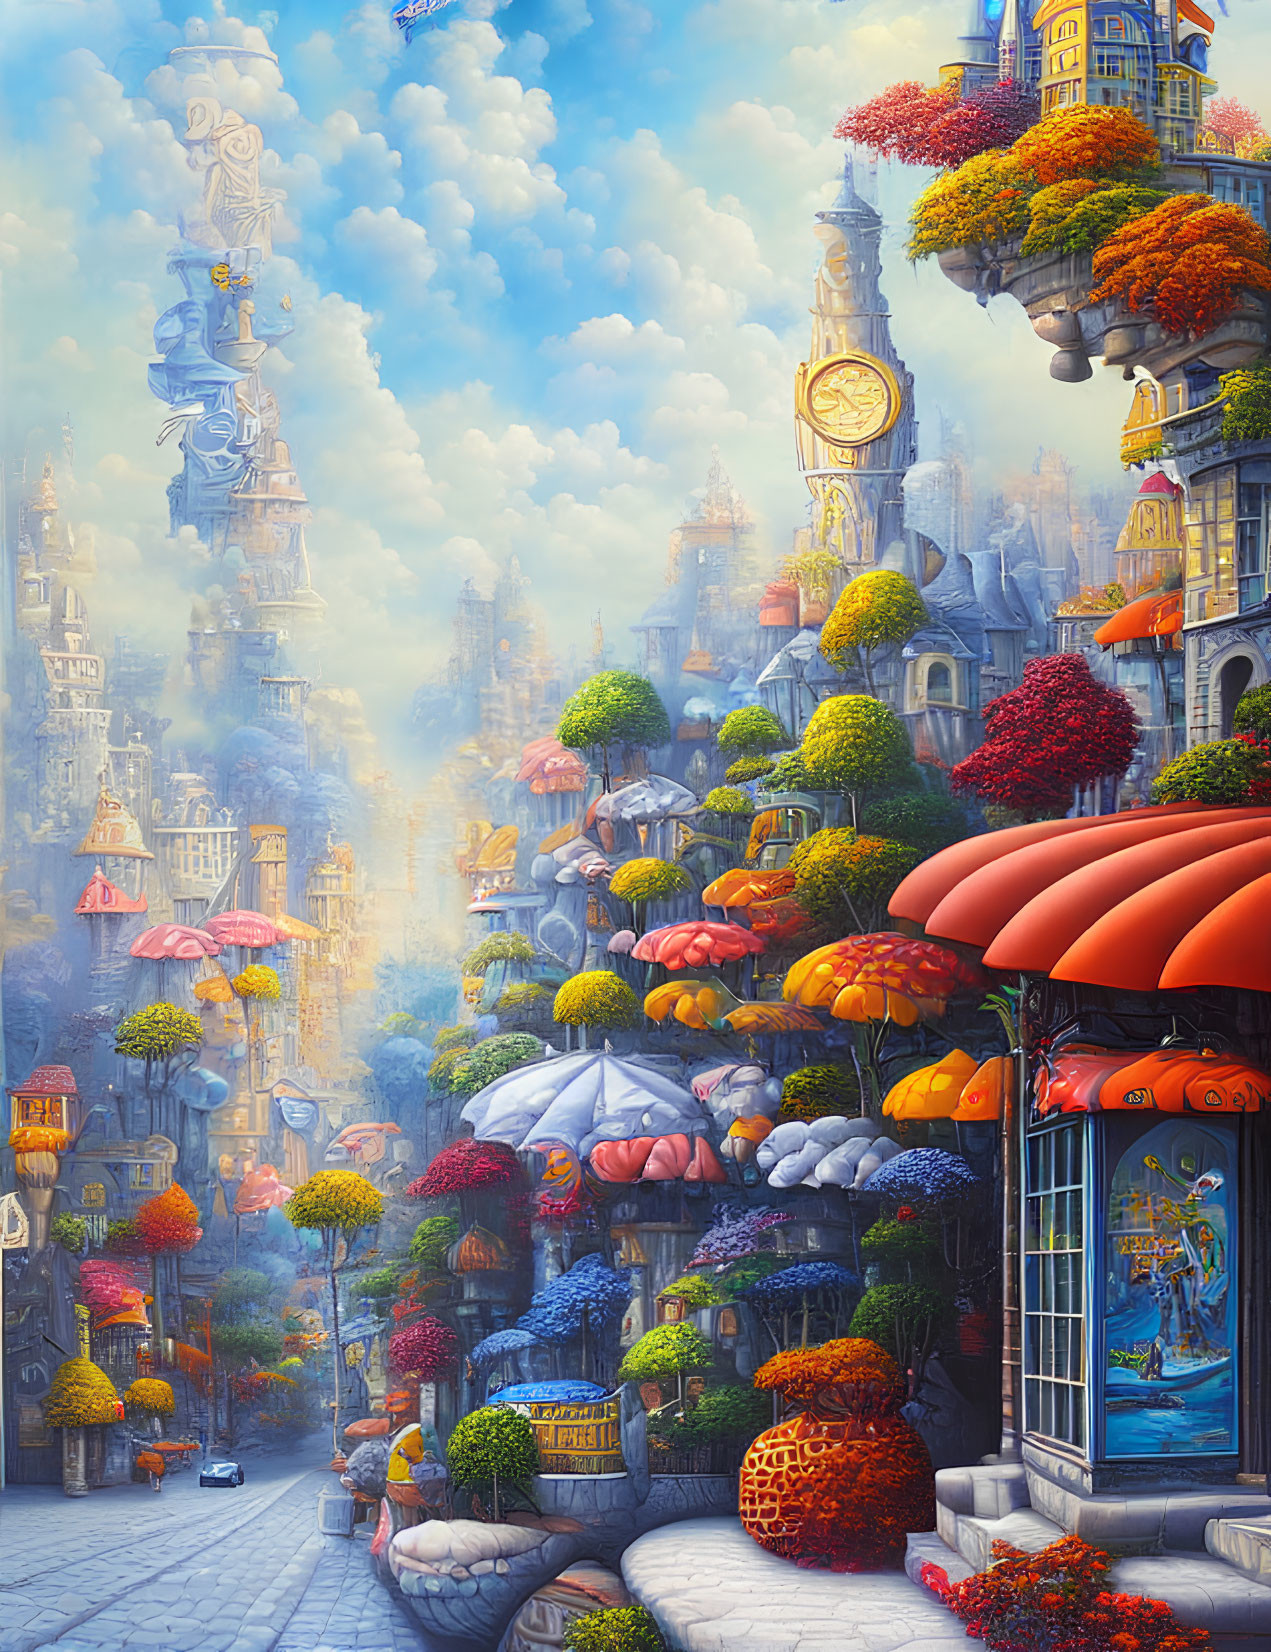 Elaborate towers and autumnal trees in a vibrant cityscape